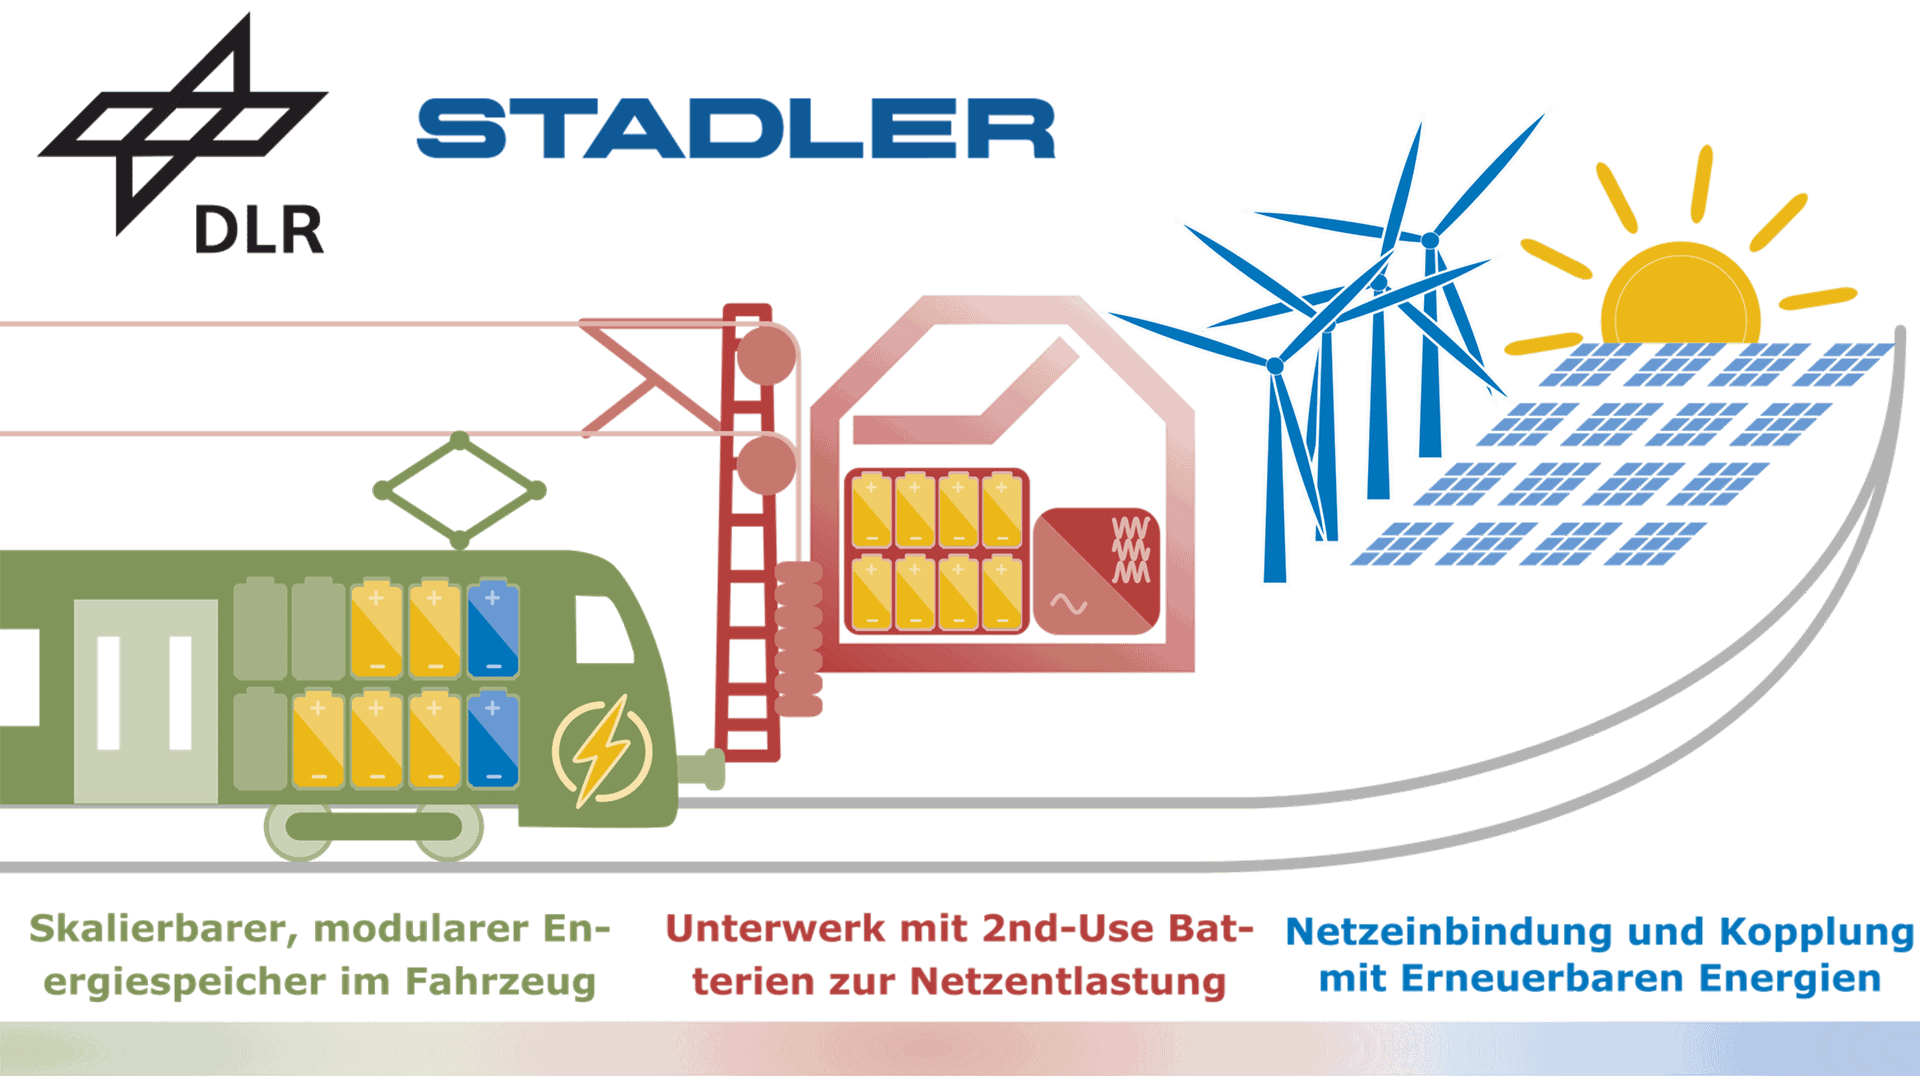 Infographic with schematic representation of the modular and scalable battery storage system